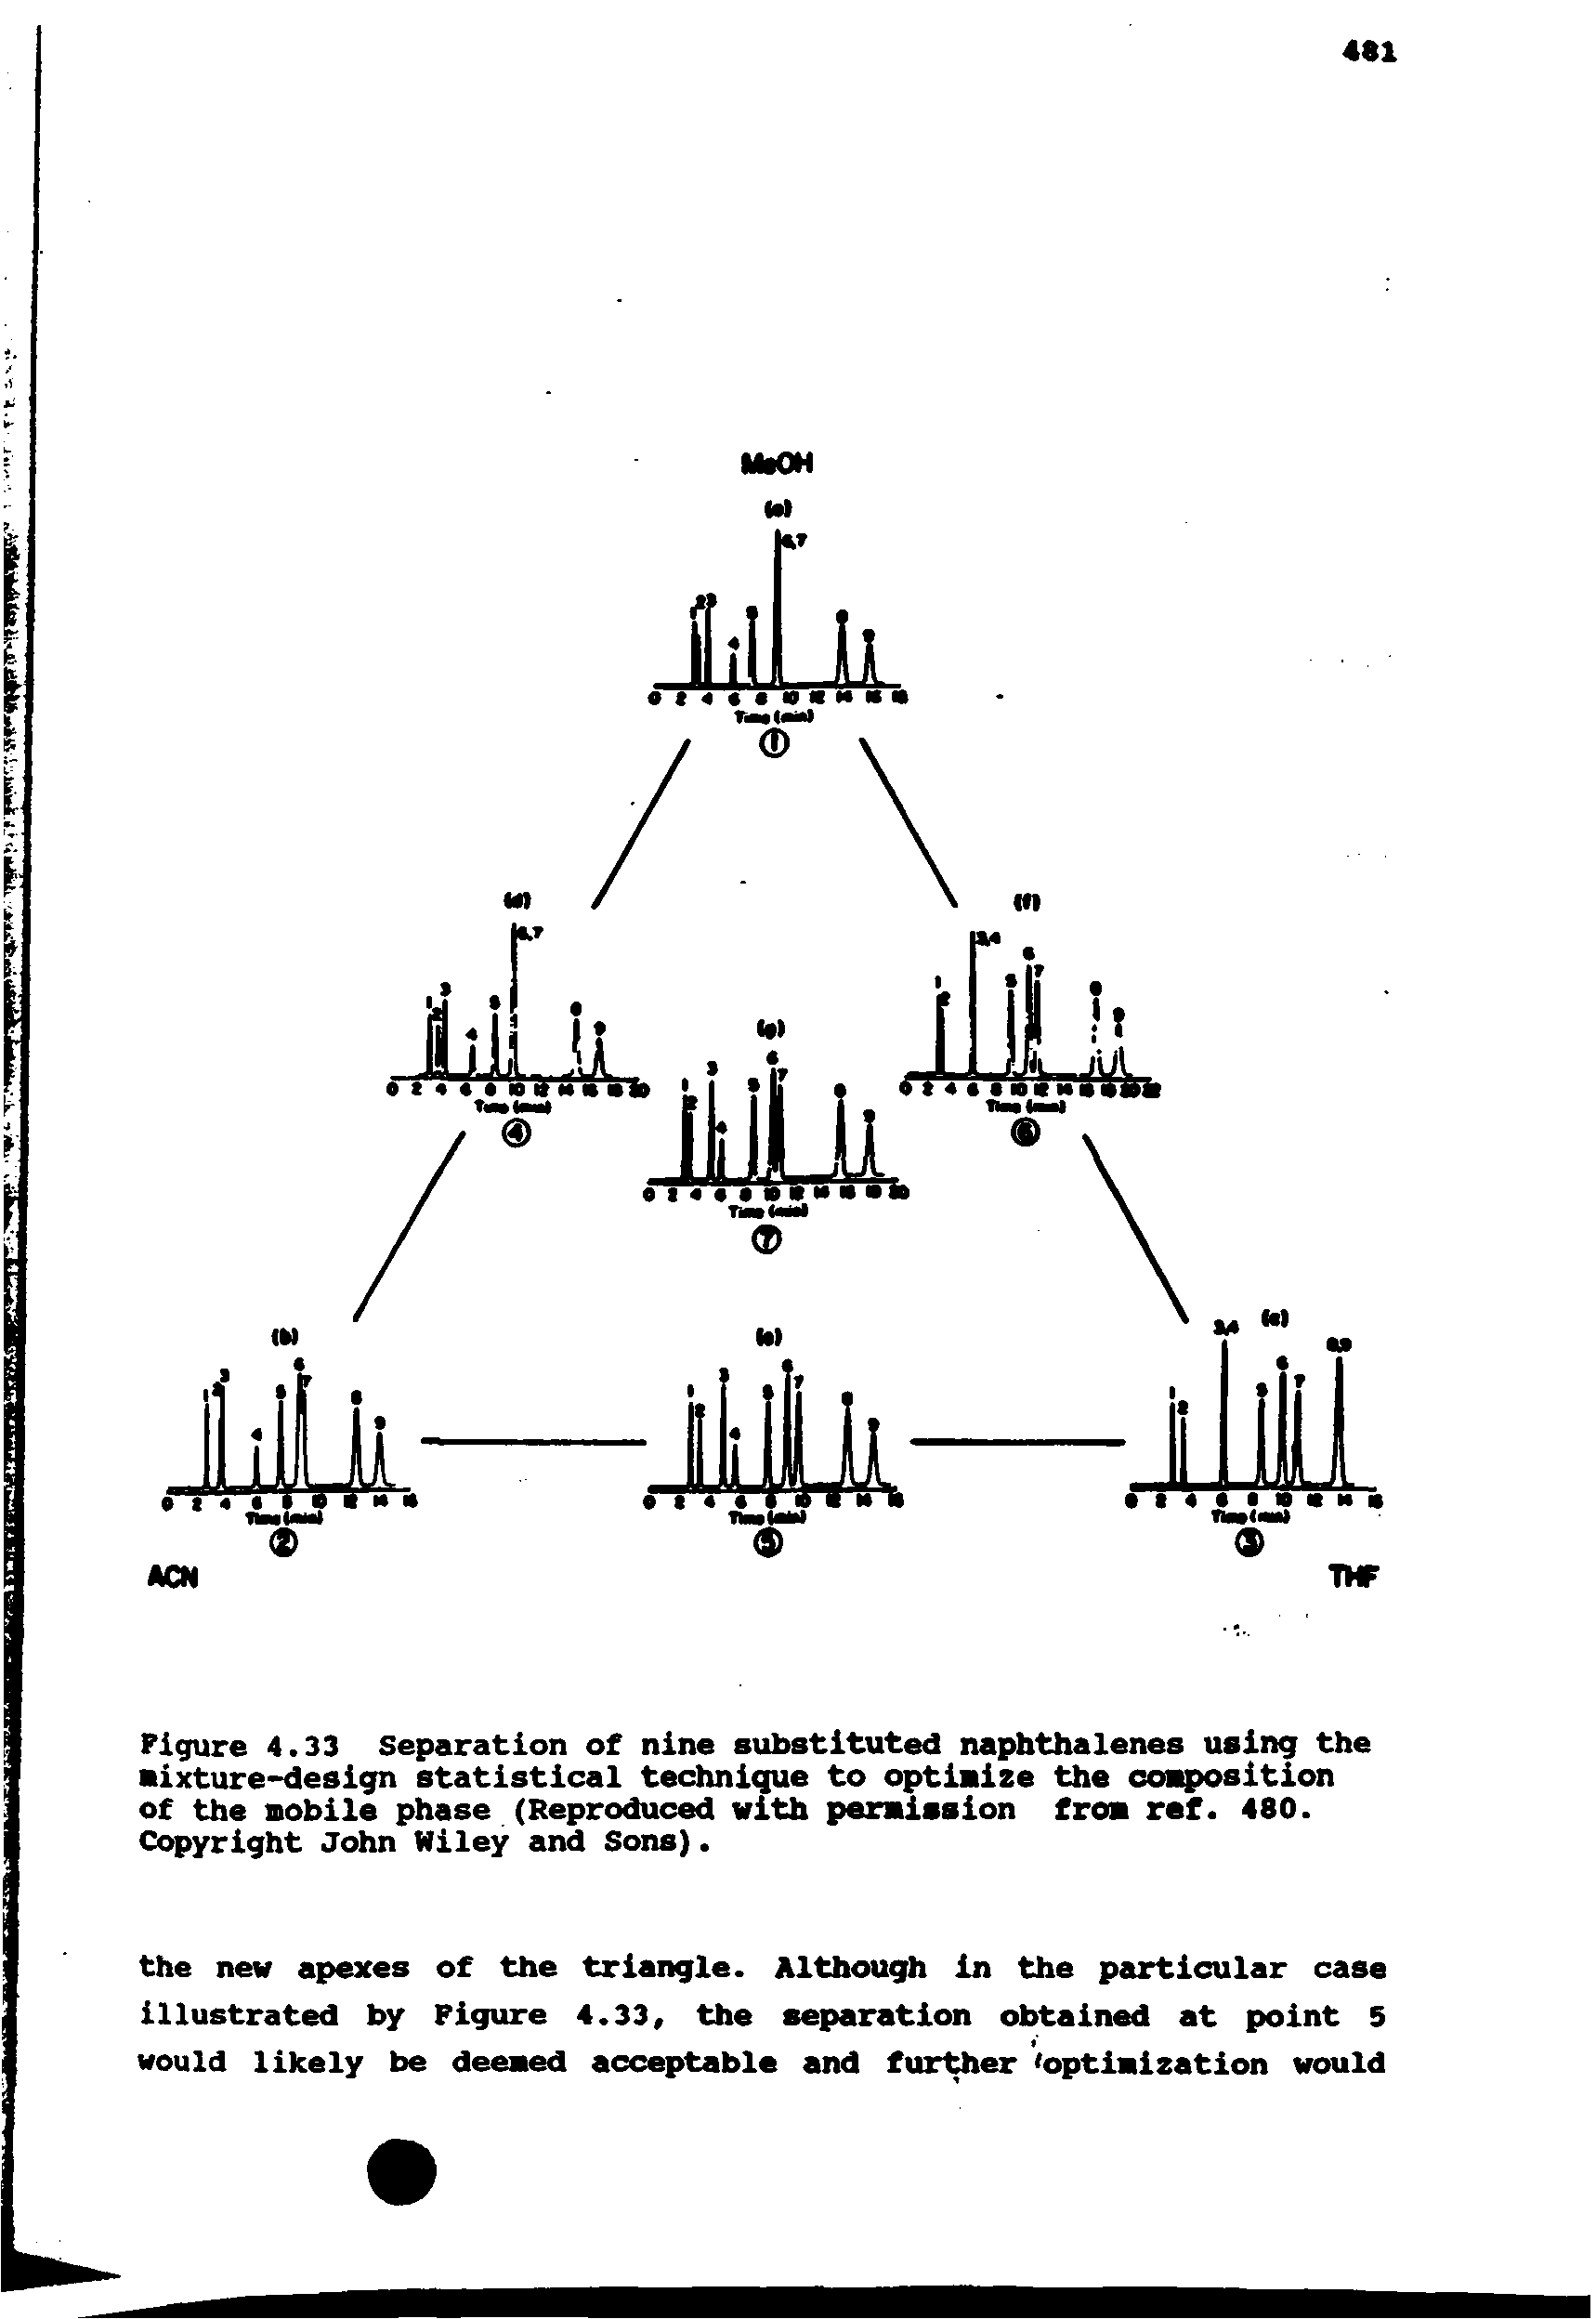 Figure 4.33 Separation of nine substituted naphthalenes using the sixture-design statistical technique to optimize the composition of the mobile phase (Reproduced with permission from ref. 480. Copyright John Wiley and Sons).